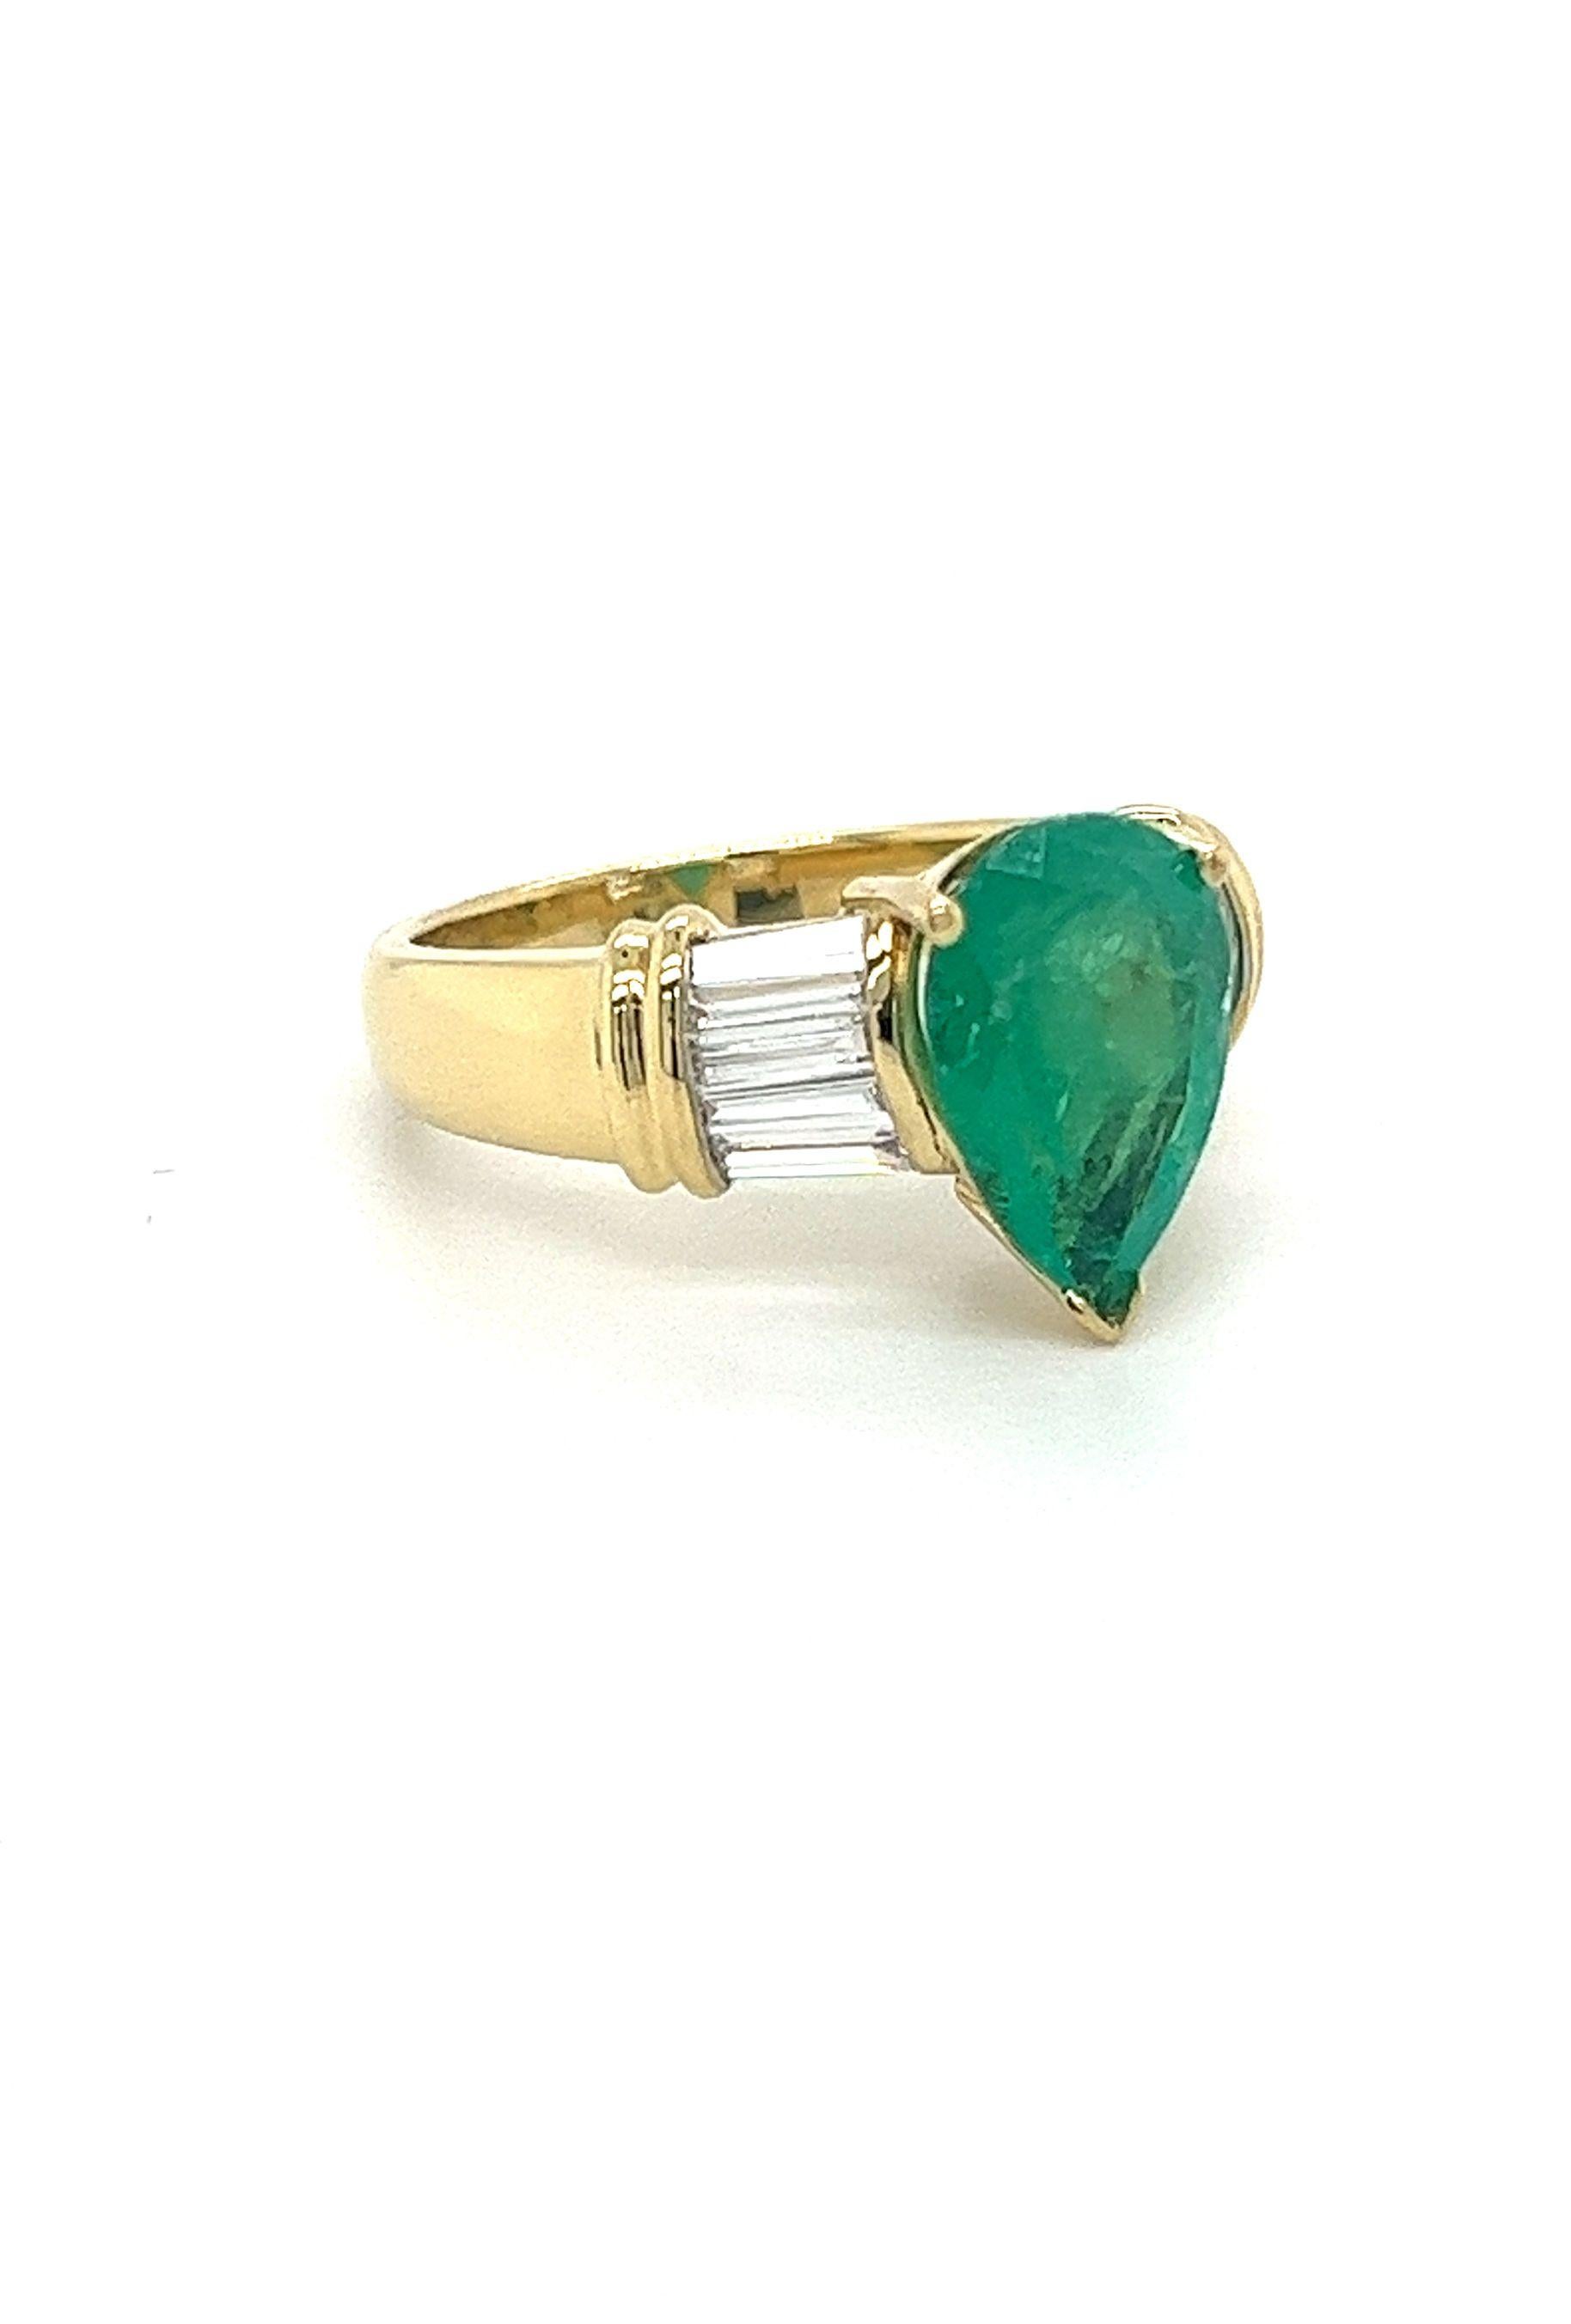 3.22 Carat Pear Cut Colombian Emerald With Baguette Diamond Side Stone 18k Ring For Sale 1